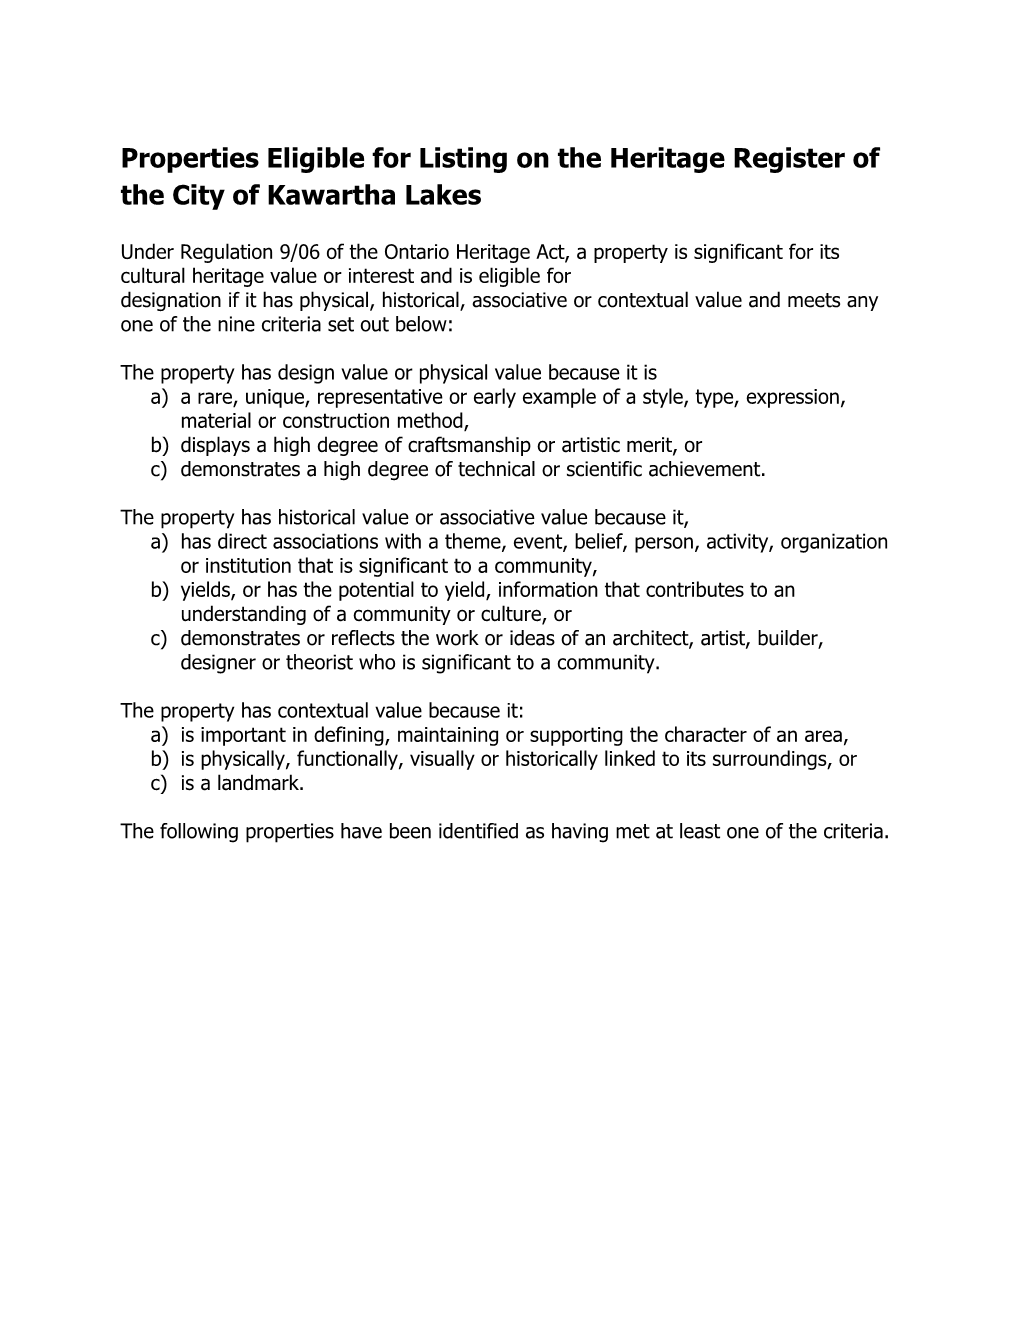 Properties Eligible for Listing on the Heritage Register of the City of Kawartha Lakes